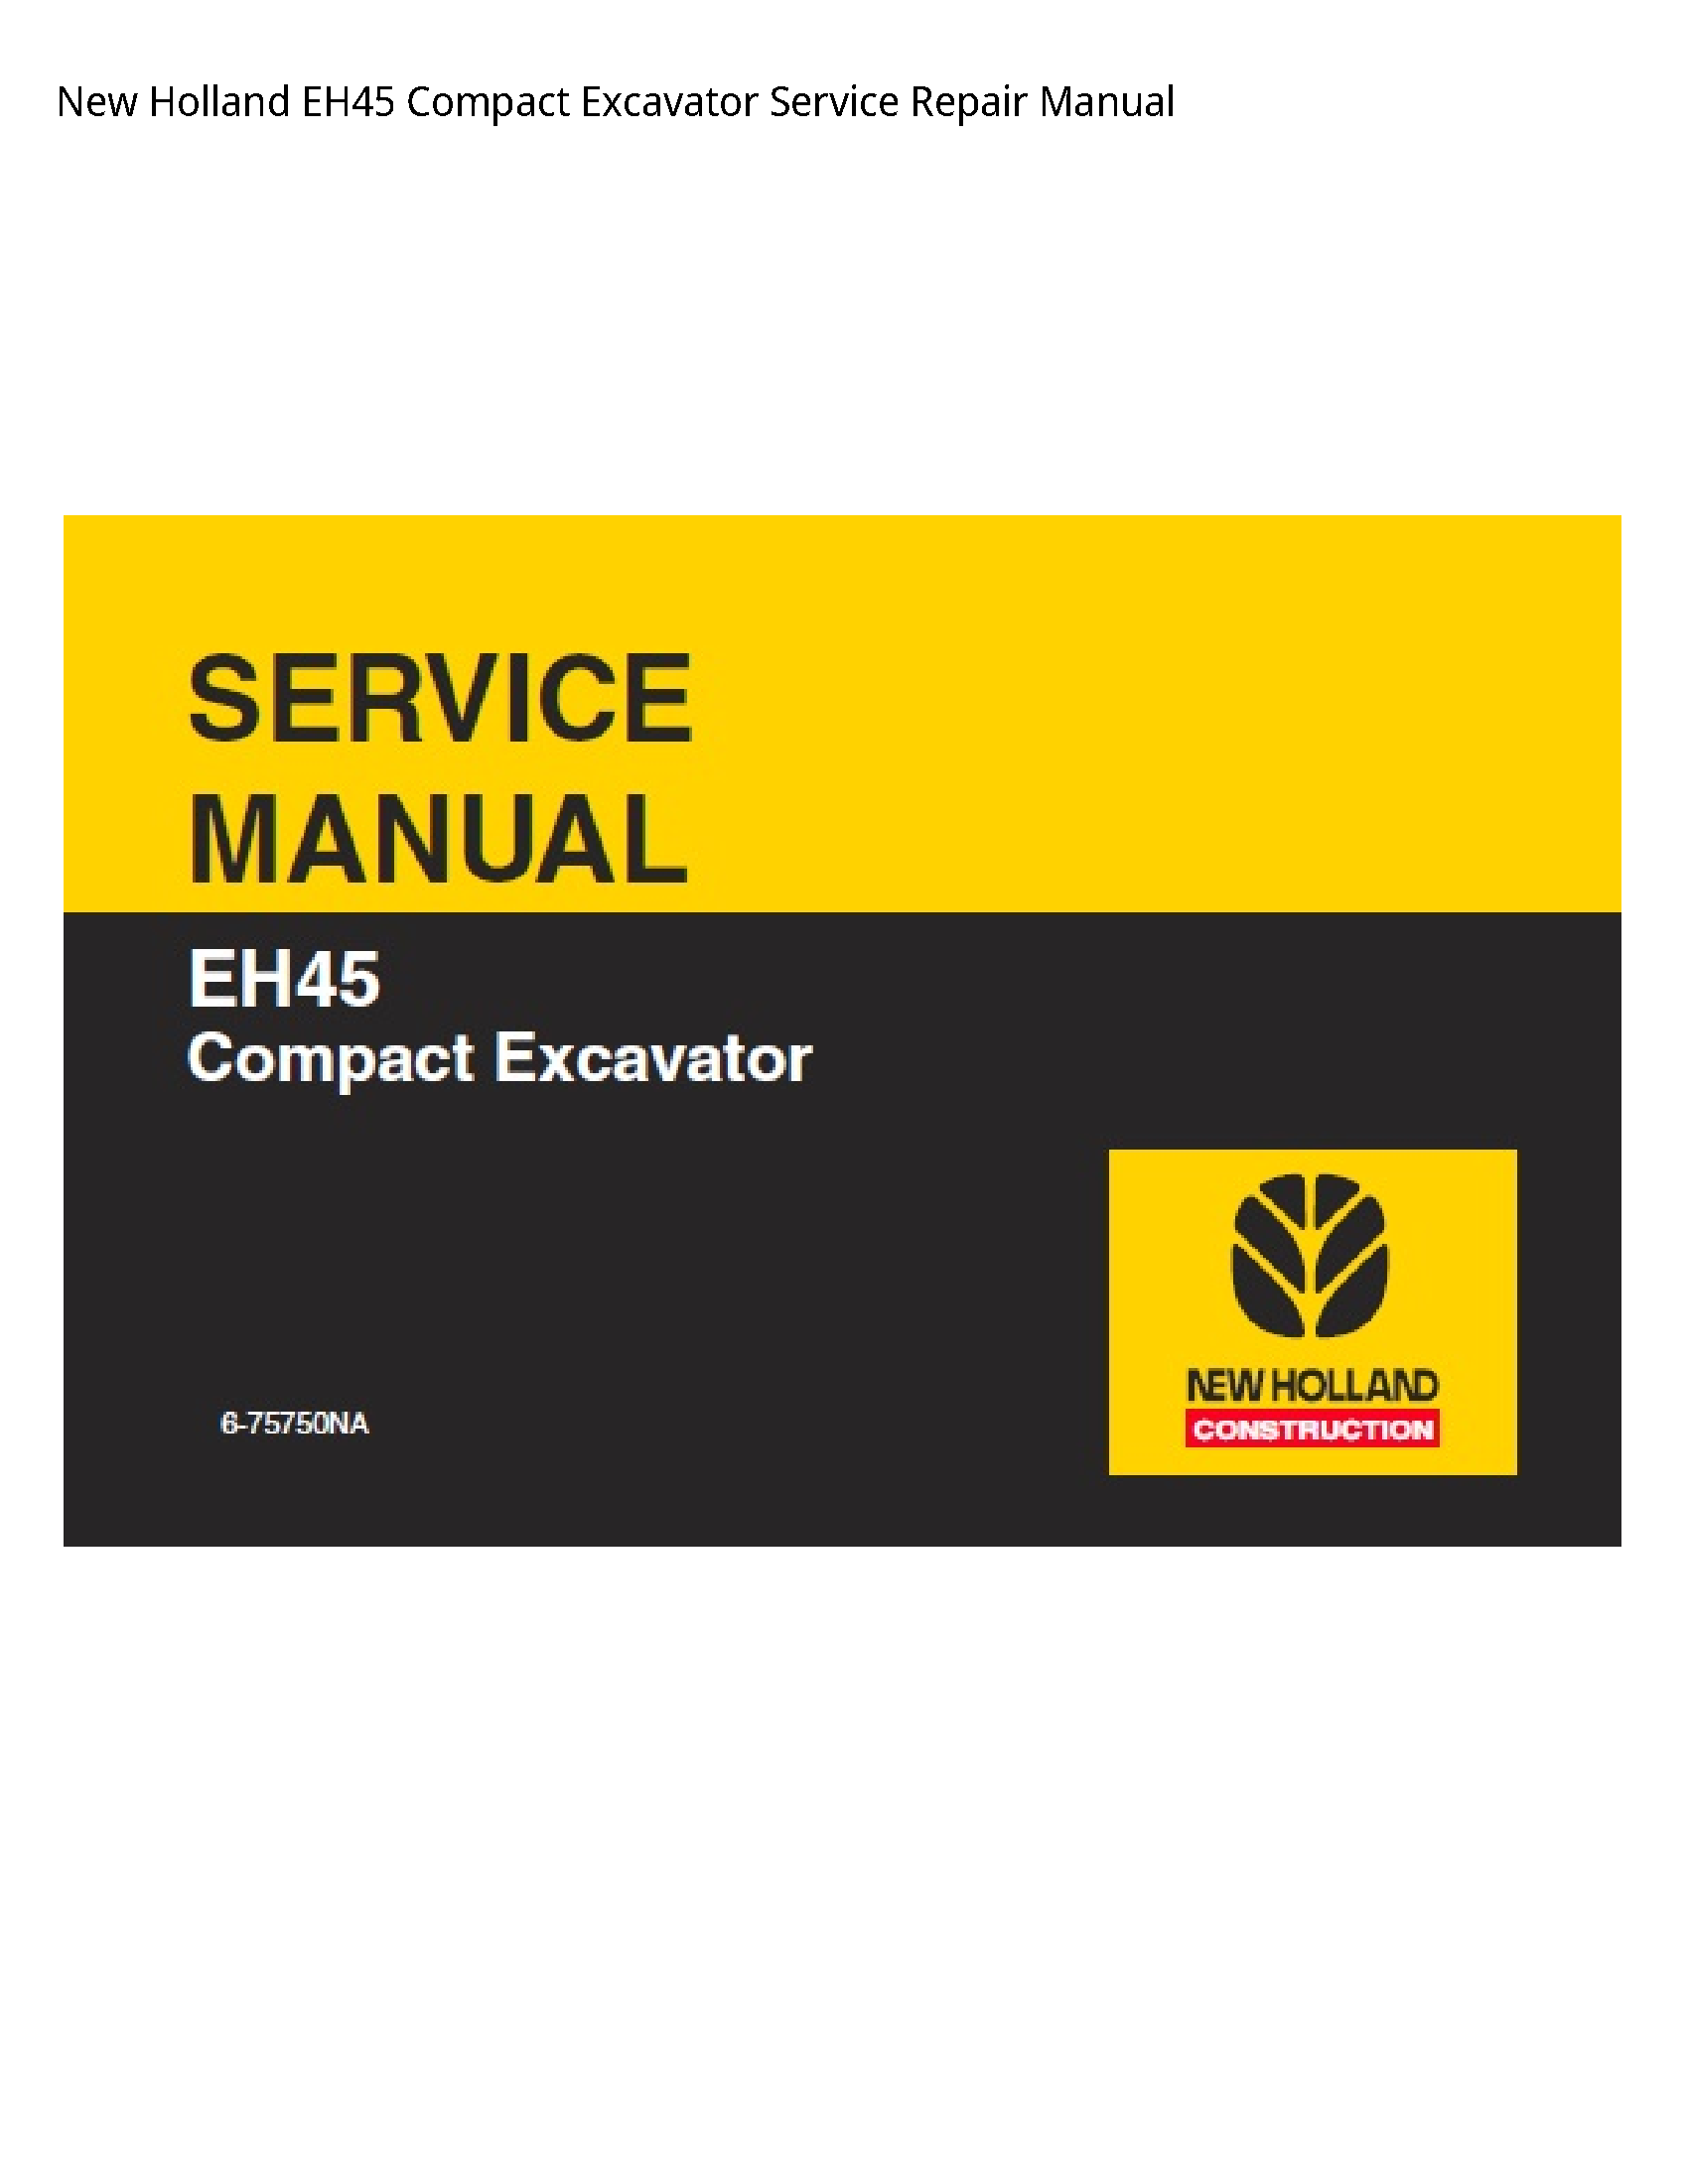 New Holland EH45 Compact Excavator manual